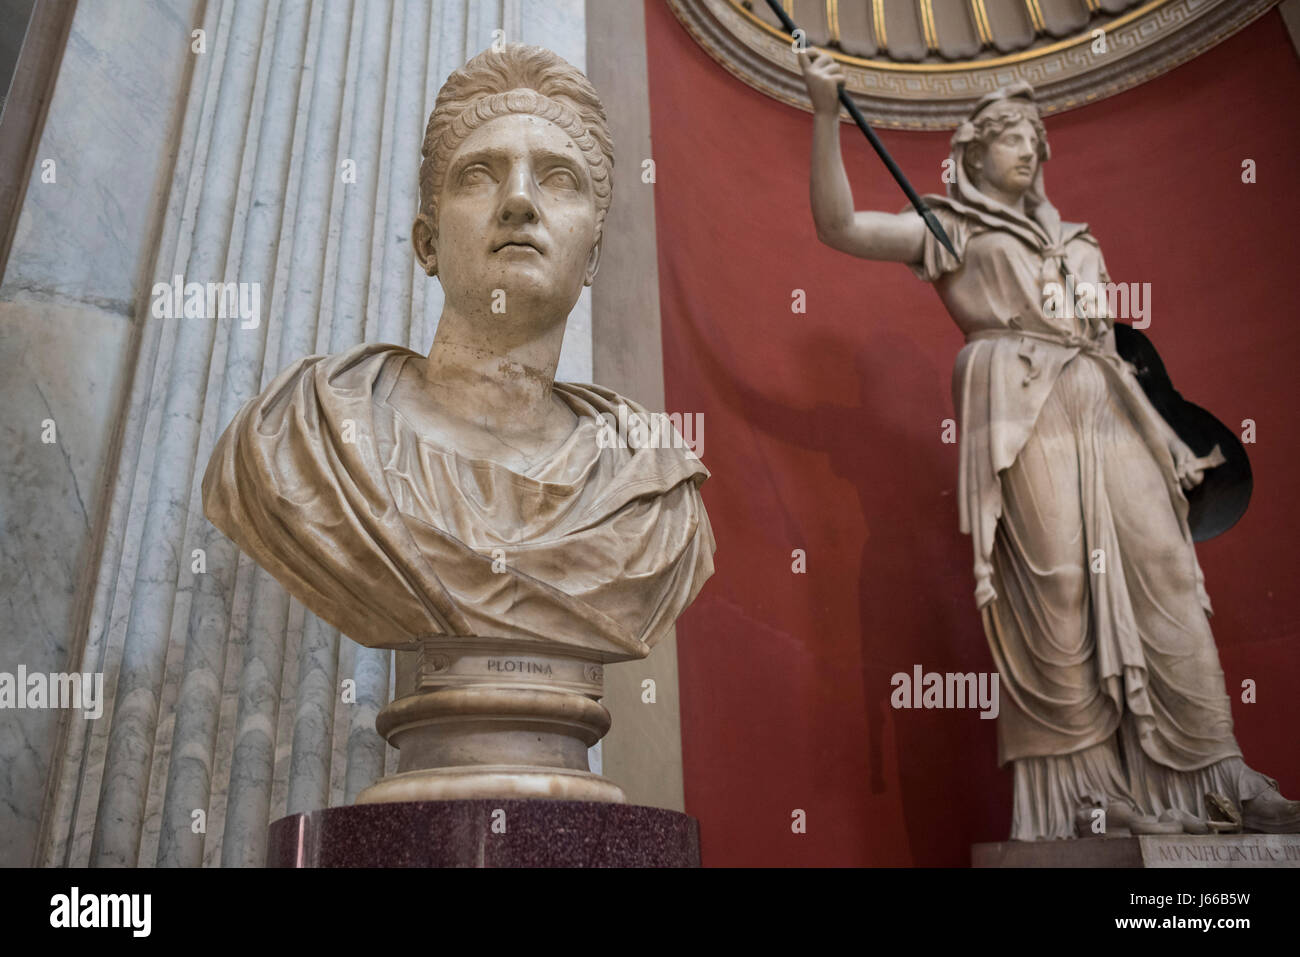 Rome. Italy. Portrait bust of Pompeia Plotina, wife of Emperor Trajan, the Round Hall, Pio Clementino Museum, Vatican Museums. Musei Vaticani. Stock Photo